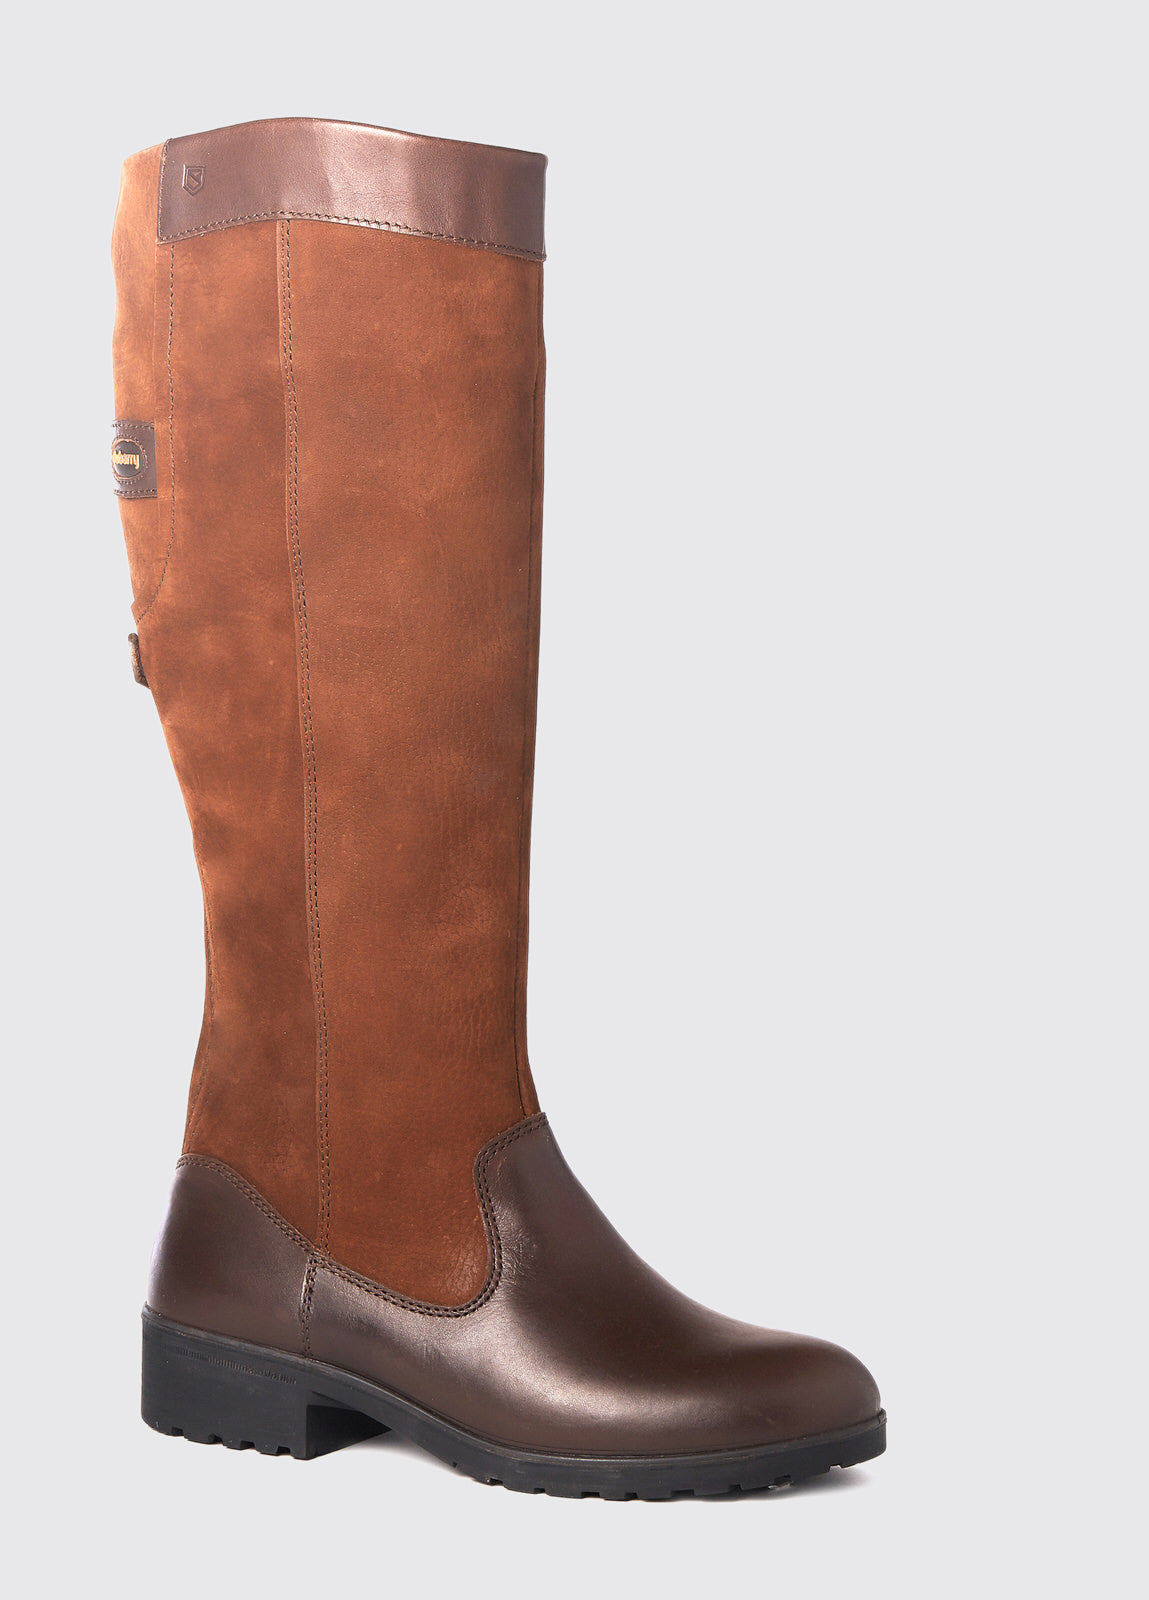 Dubarry Clare Country Boot Walnut